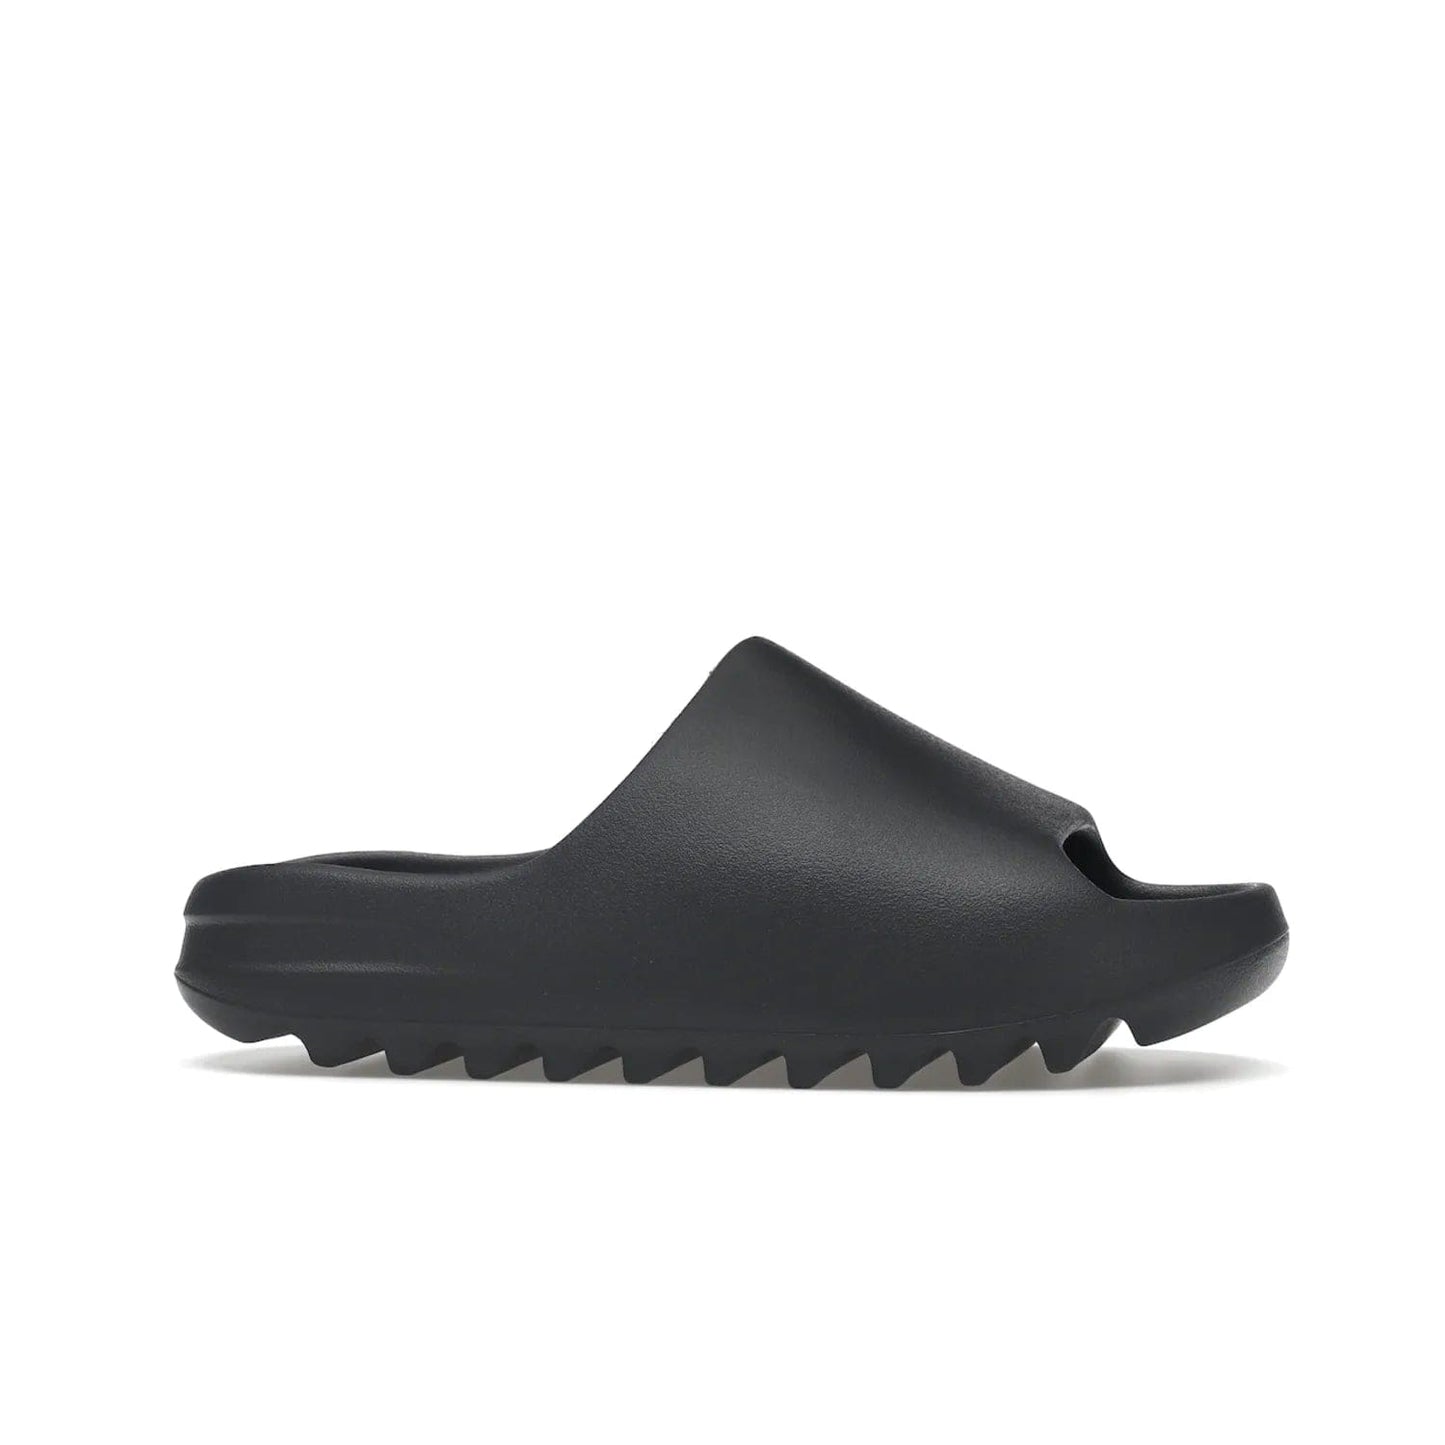 adidas Yeezy Slide Slate Grey - Image 2 - Only at www.BallersClubKickz.com - Stylish & comfortable adidas Yeezy Slide Slate Grey features an EVA foam upper, strategic cutouts, textured outsole pattern, & easy slip-on design for modern comfort & classic style.